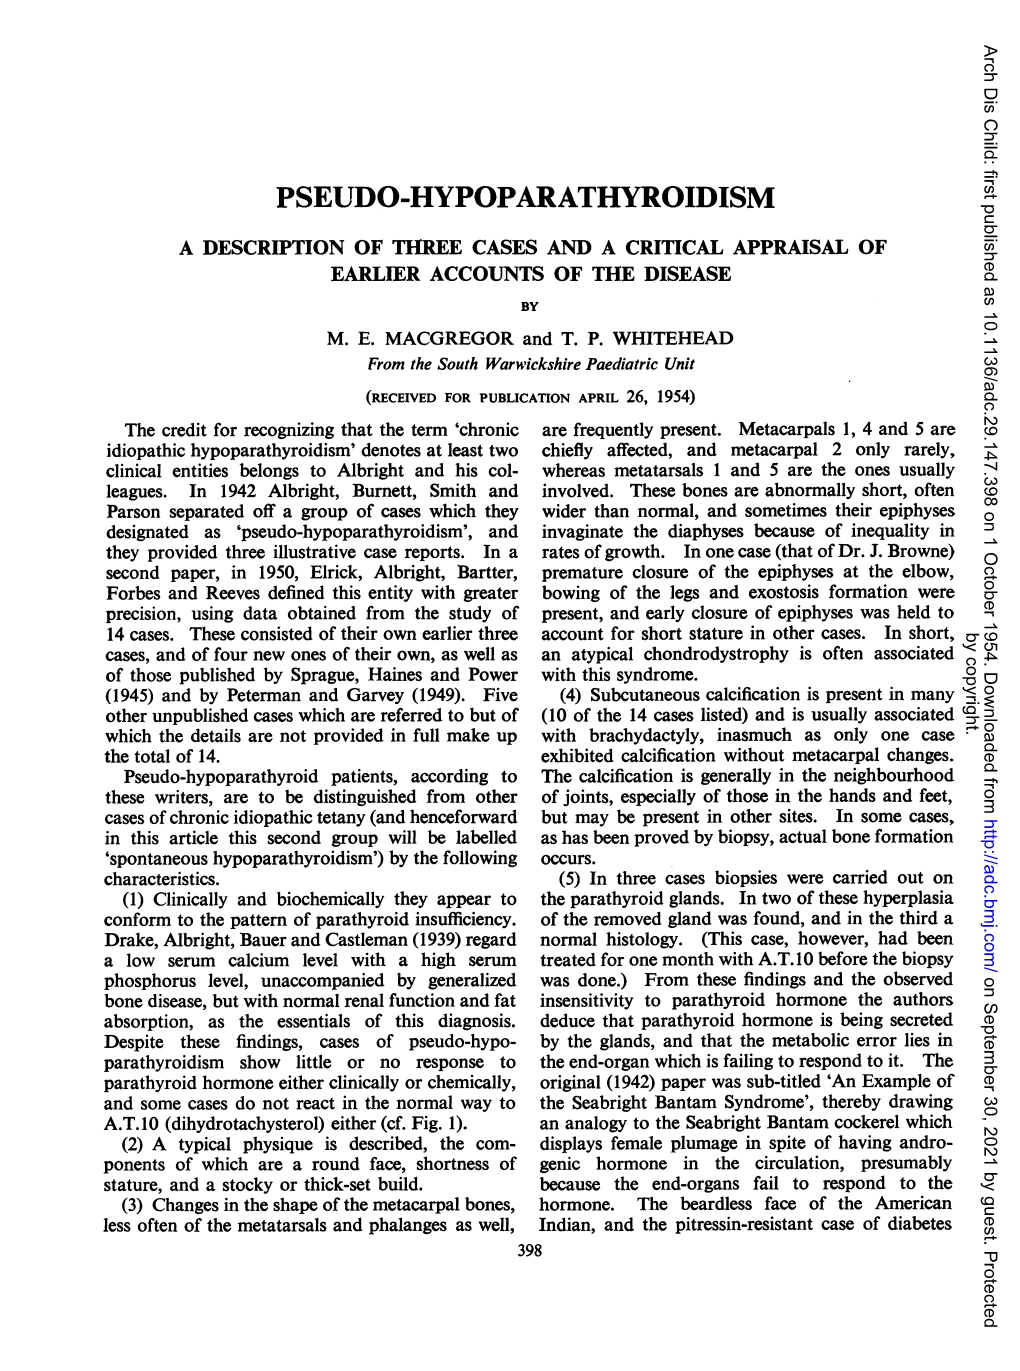 Pseudo-Hypoparathyroidism a Description of Three Cases and a Critical Appraisal of Earlier Accounts of the Disease by M